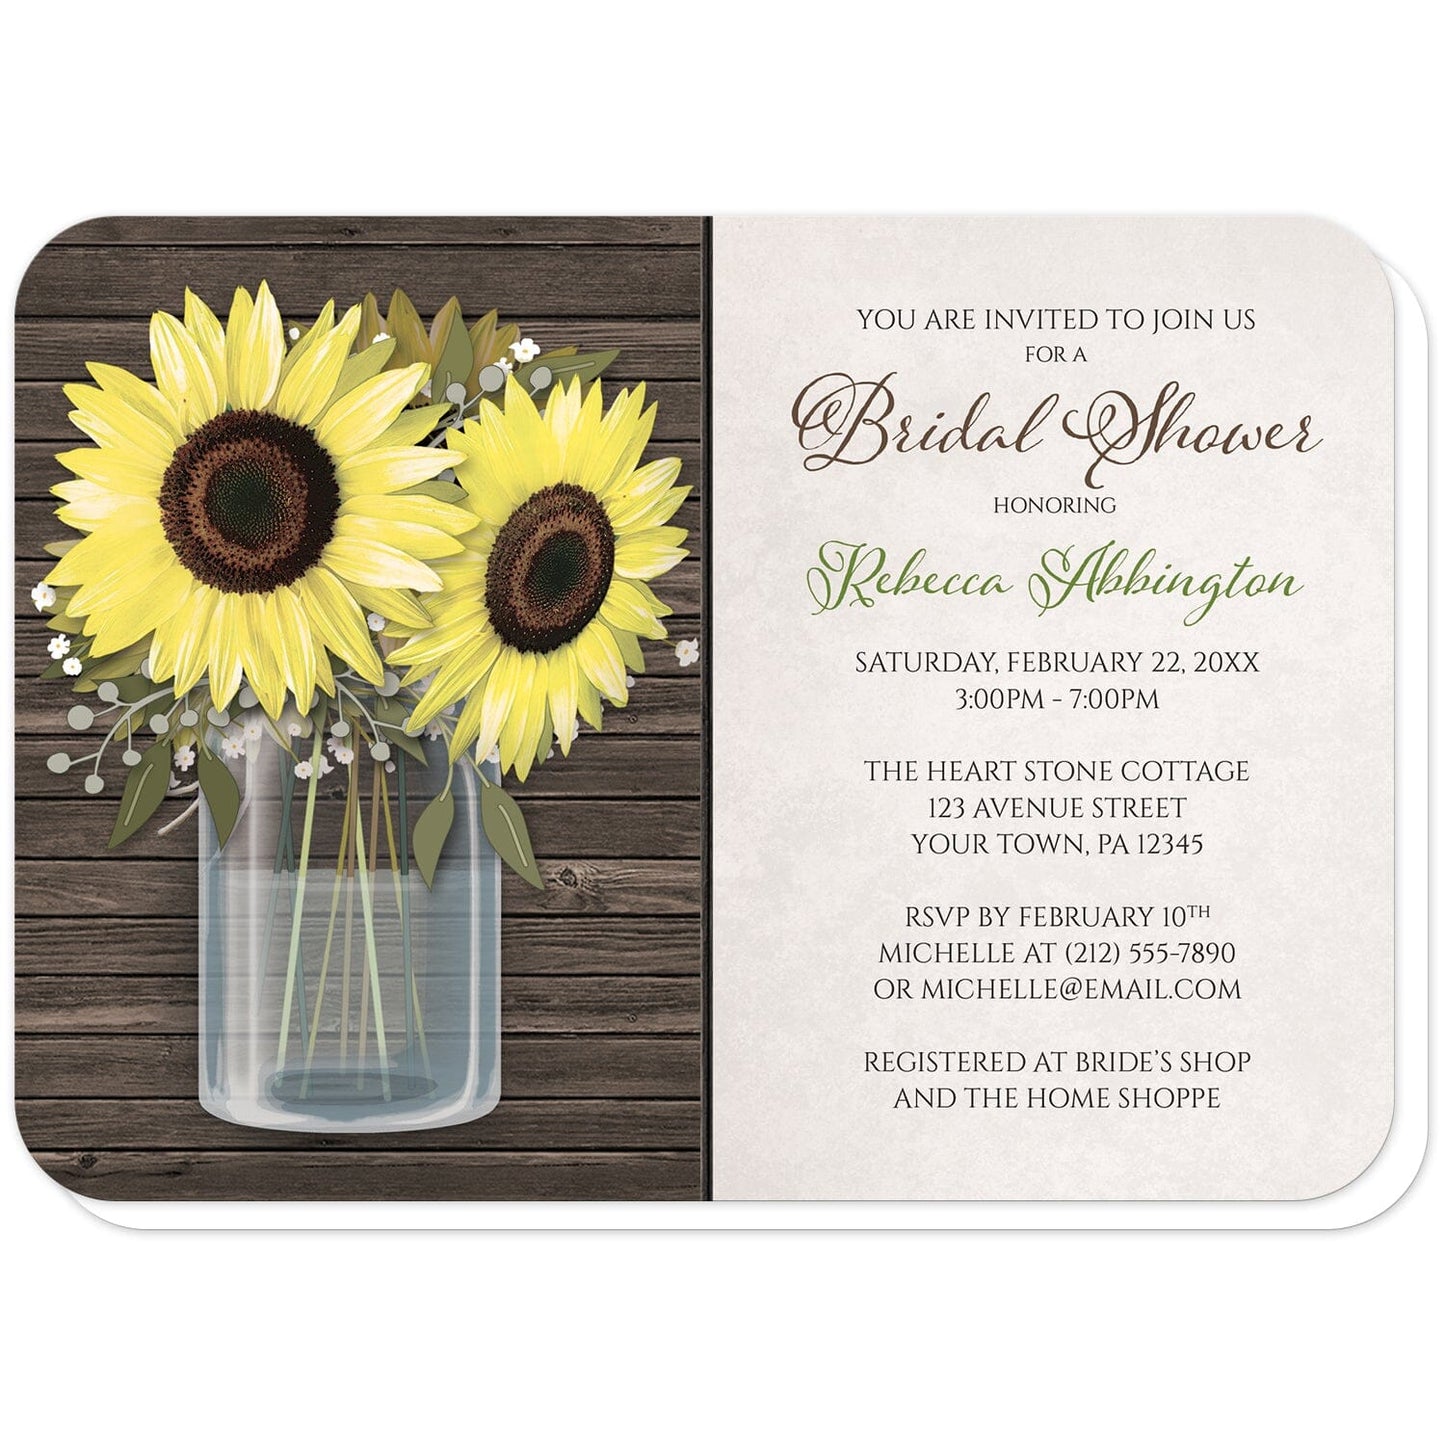 Sunflower Wood Mason Jar Rustic Bridal Shower Invitations (with rounded corners) at Artistically Invited. Country-inspired sunflower wood mason jar rustic bridal shower invitations designed with an illustrated glass mason jar with water holding big yellow sunflowers over rustic brown wood. Your personalized bridal shower celebration details are custom printed in green and brown over a light parchment-like background to the right of the mason jar design. 